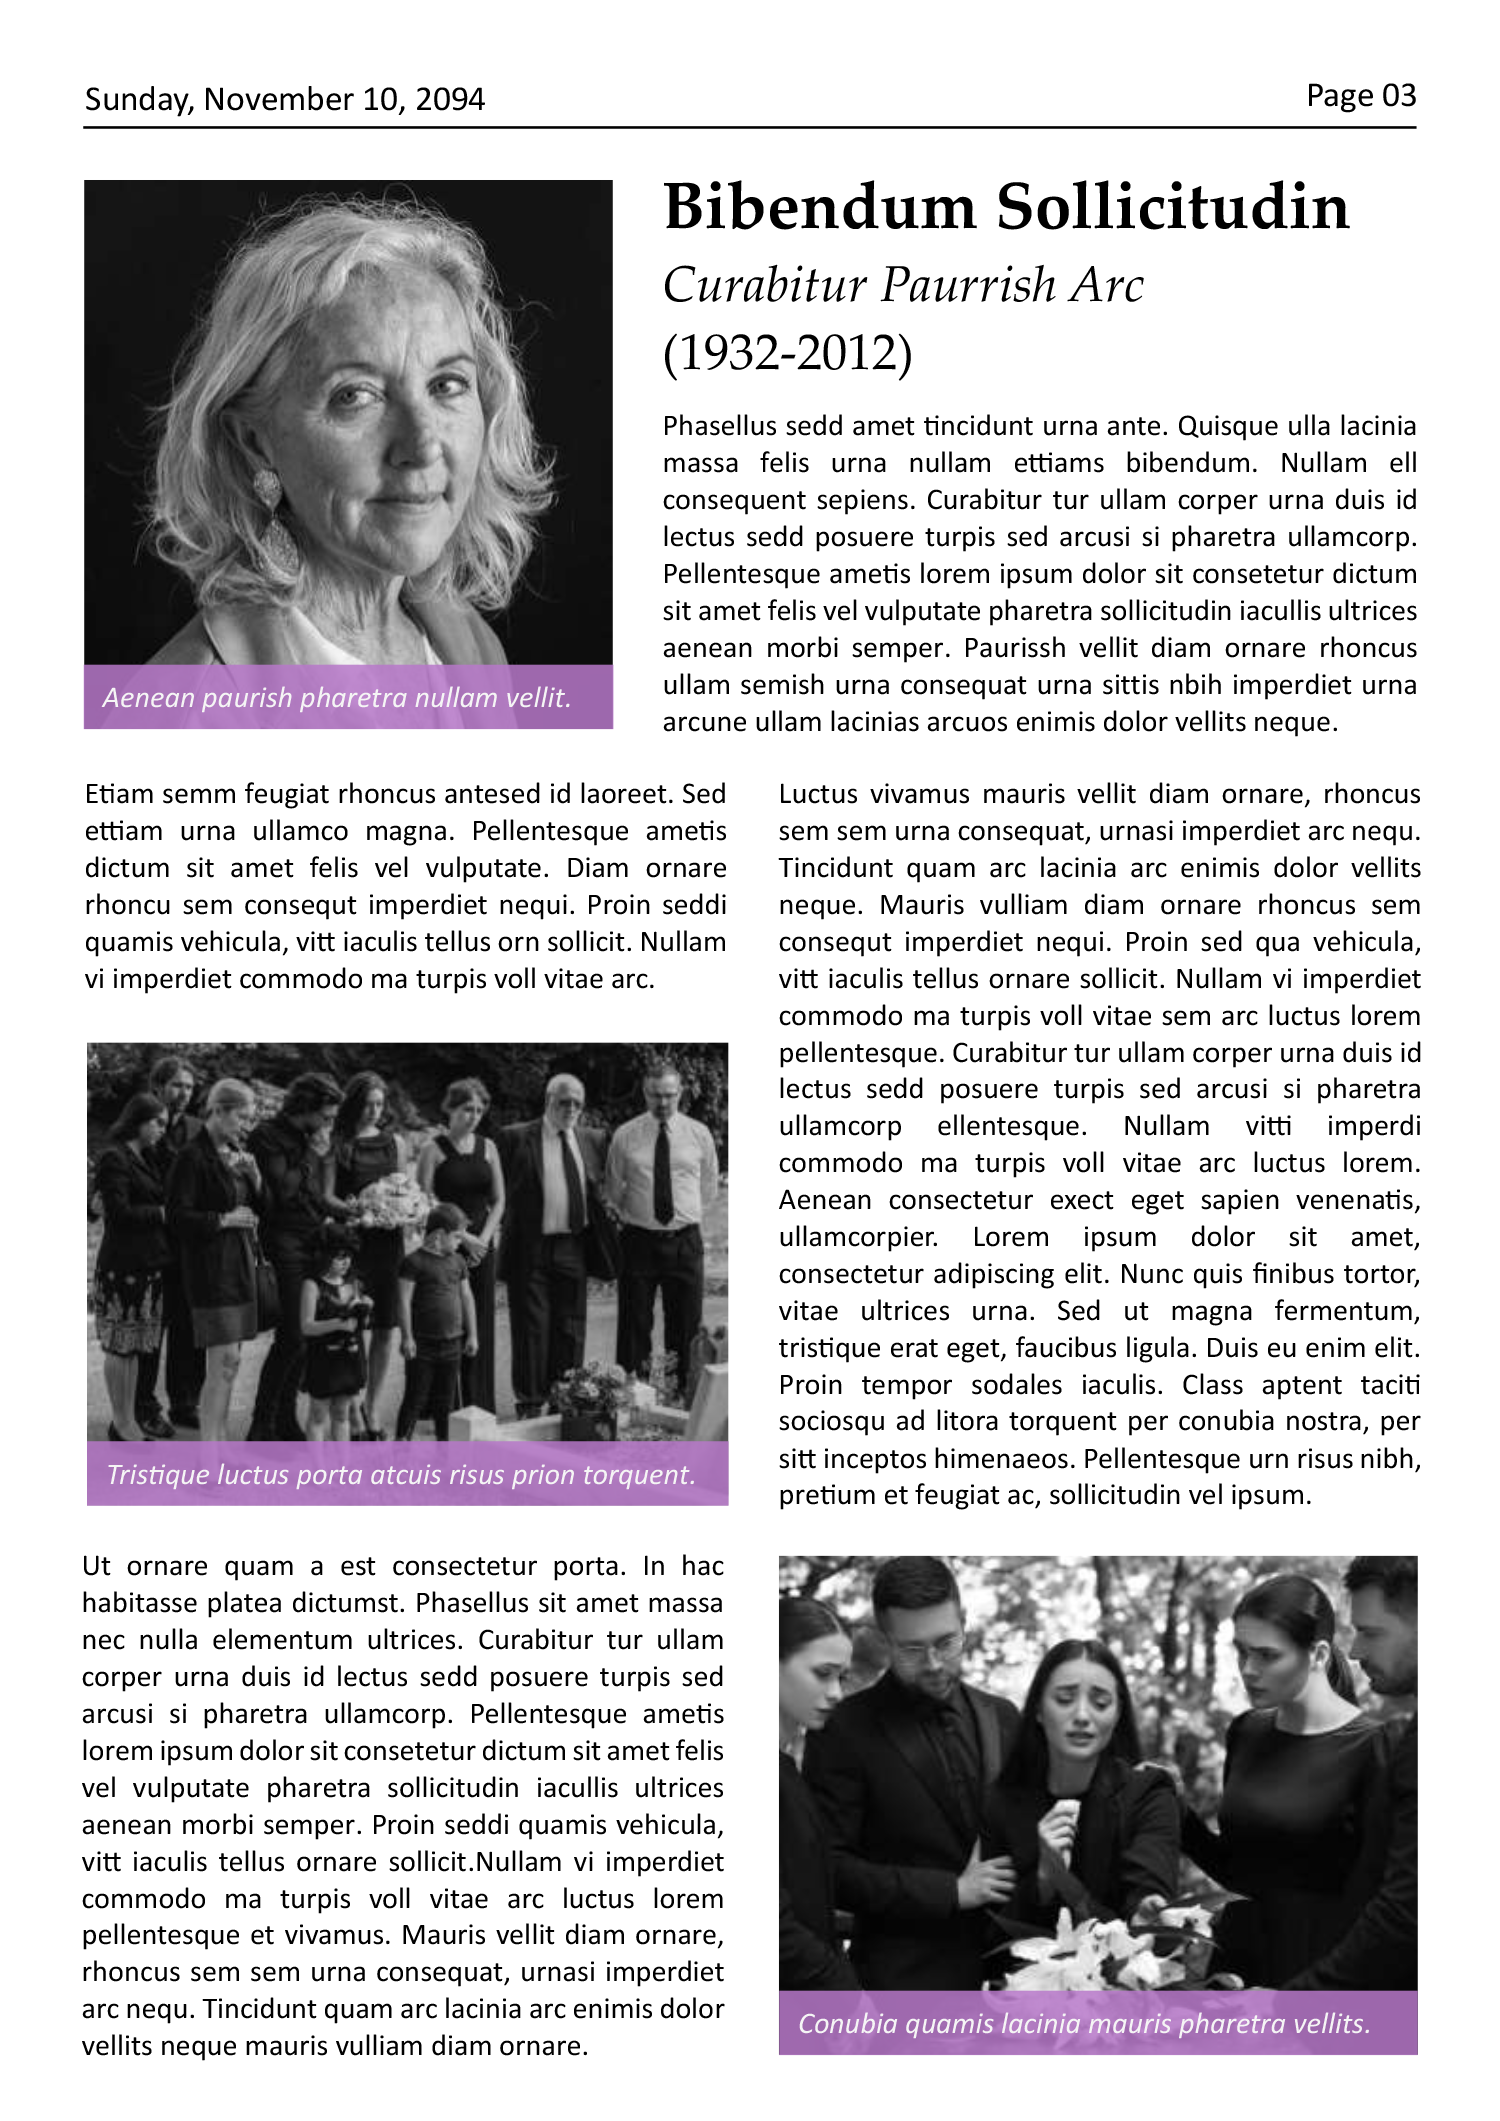 Classic A4 Newspaper Obituary Page Template - Page 03